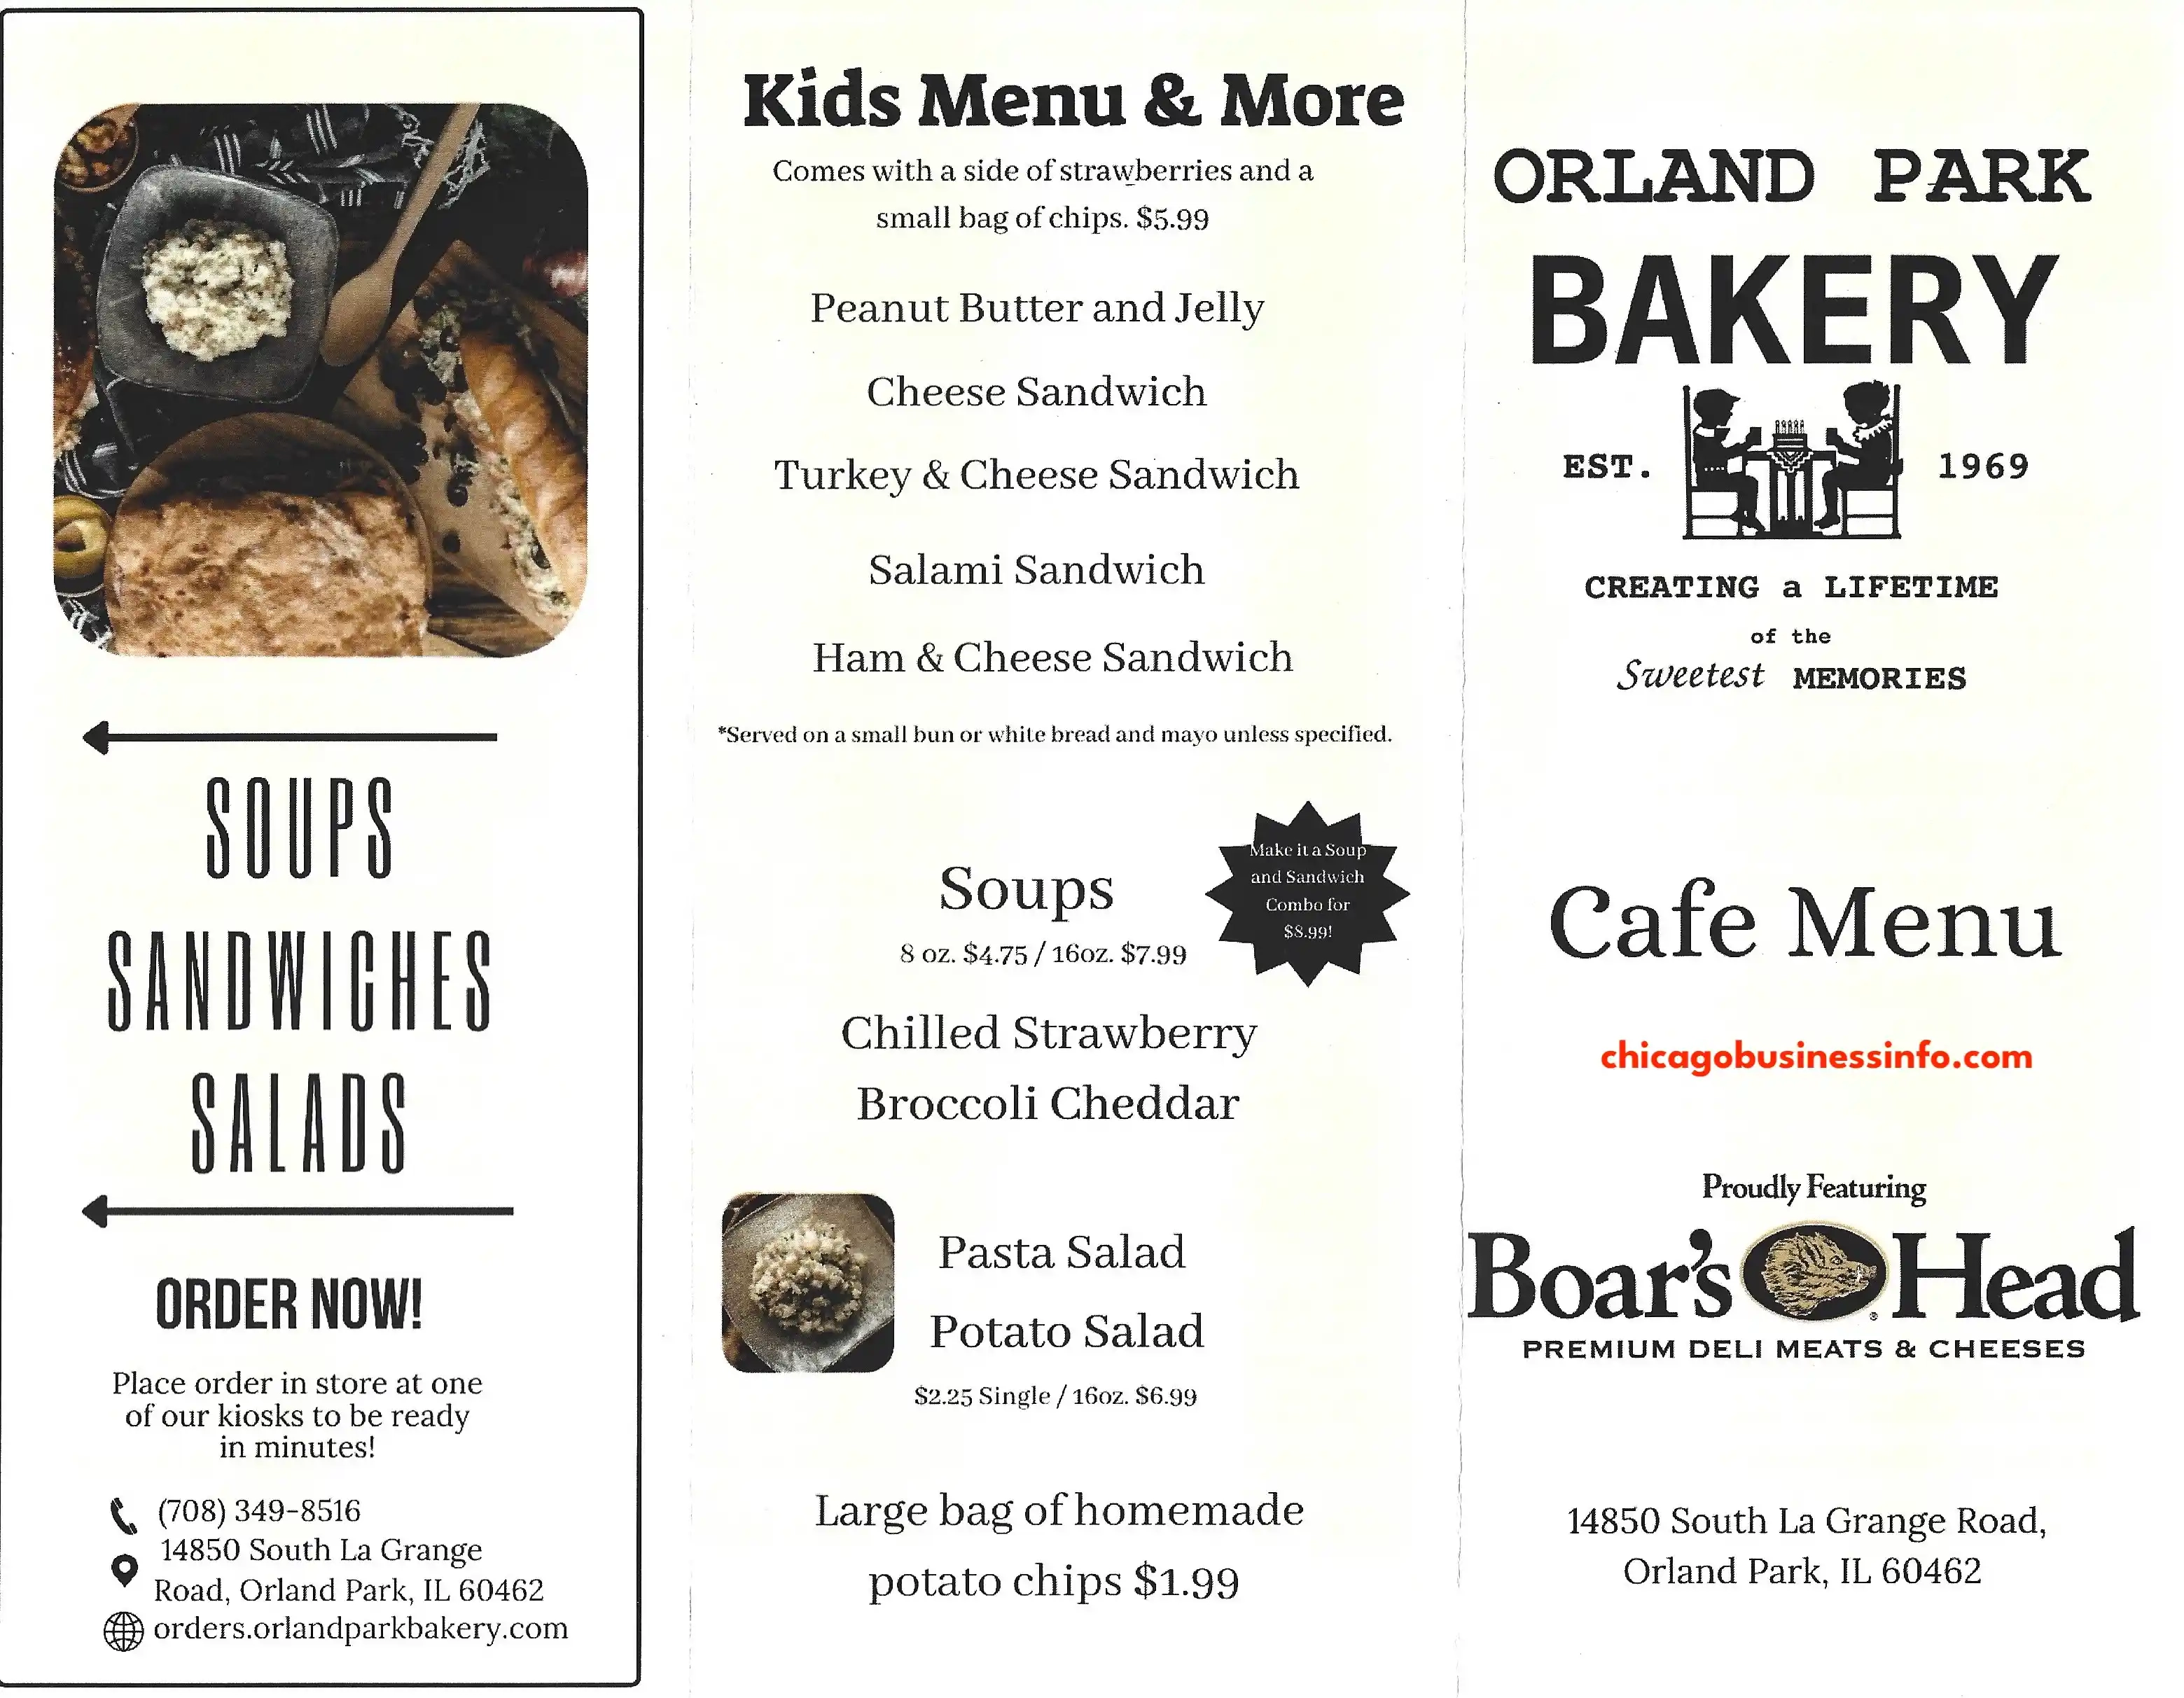 Orland Park Bakery Carry Out Cafe Menu 1